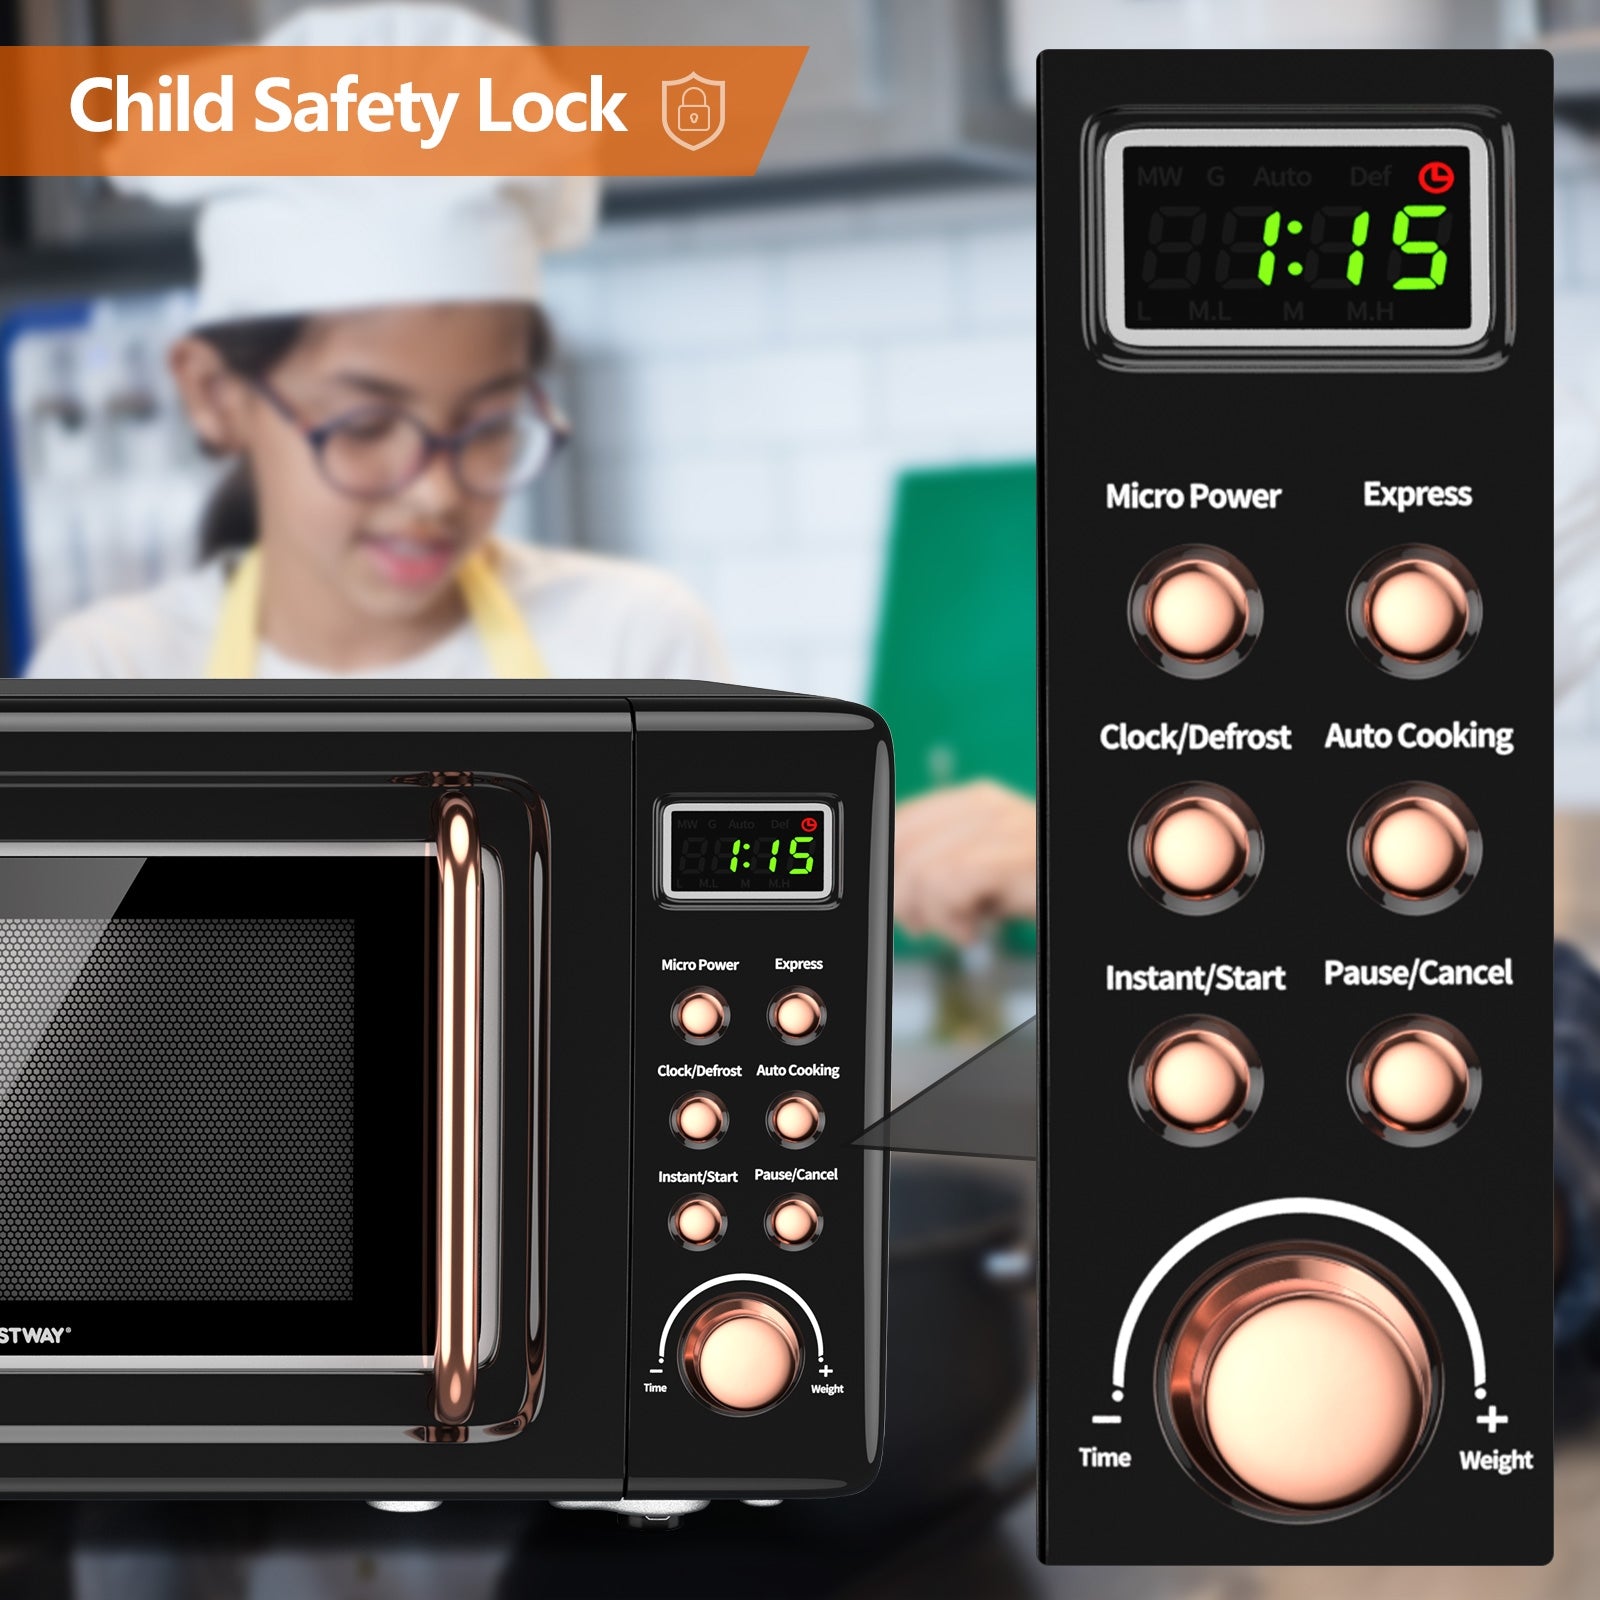 700W Countertop Microwave Oven with Auto Cooking Function and Child Lock Design